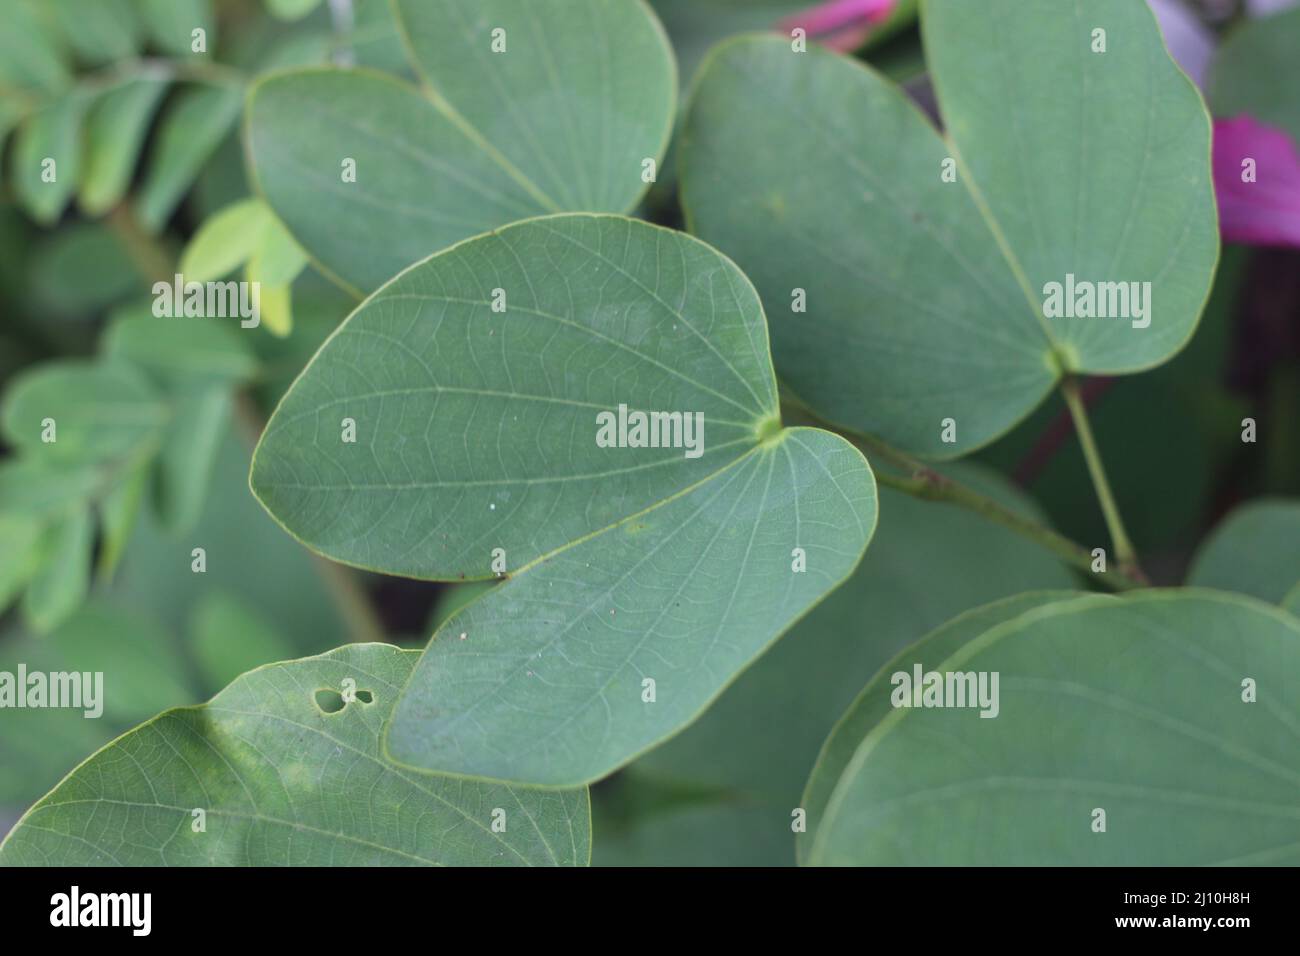 The leaves of bauhinia purpurea, or commonly known as orchid tree, purple bauhinia, camel's foot, butterfly tree and Hawaiian orchid tree Stock Photo